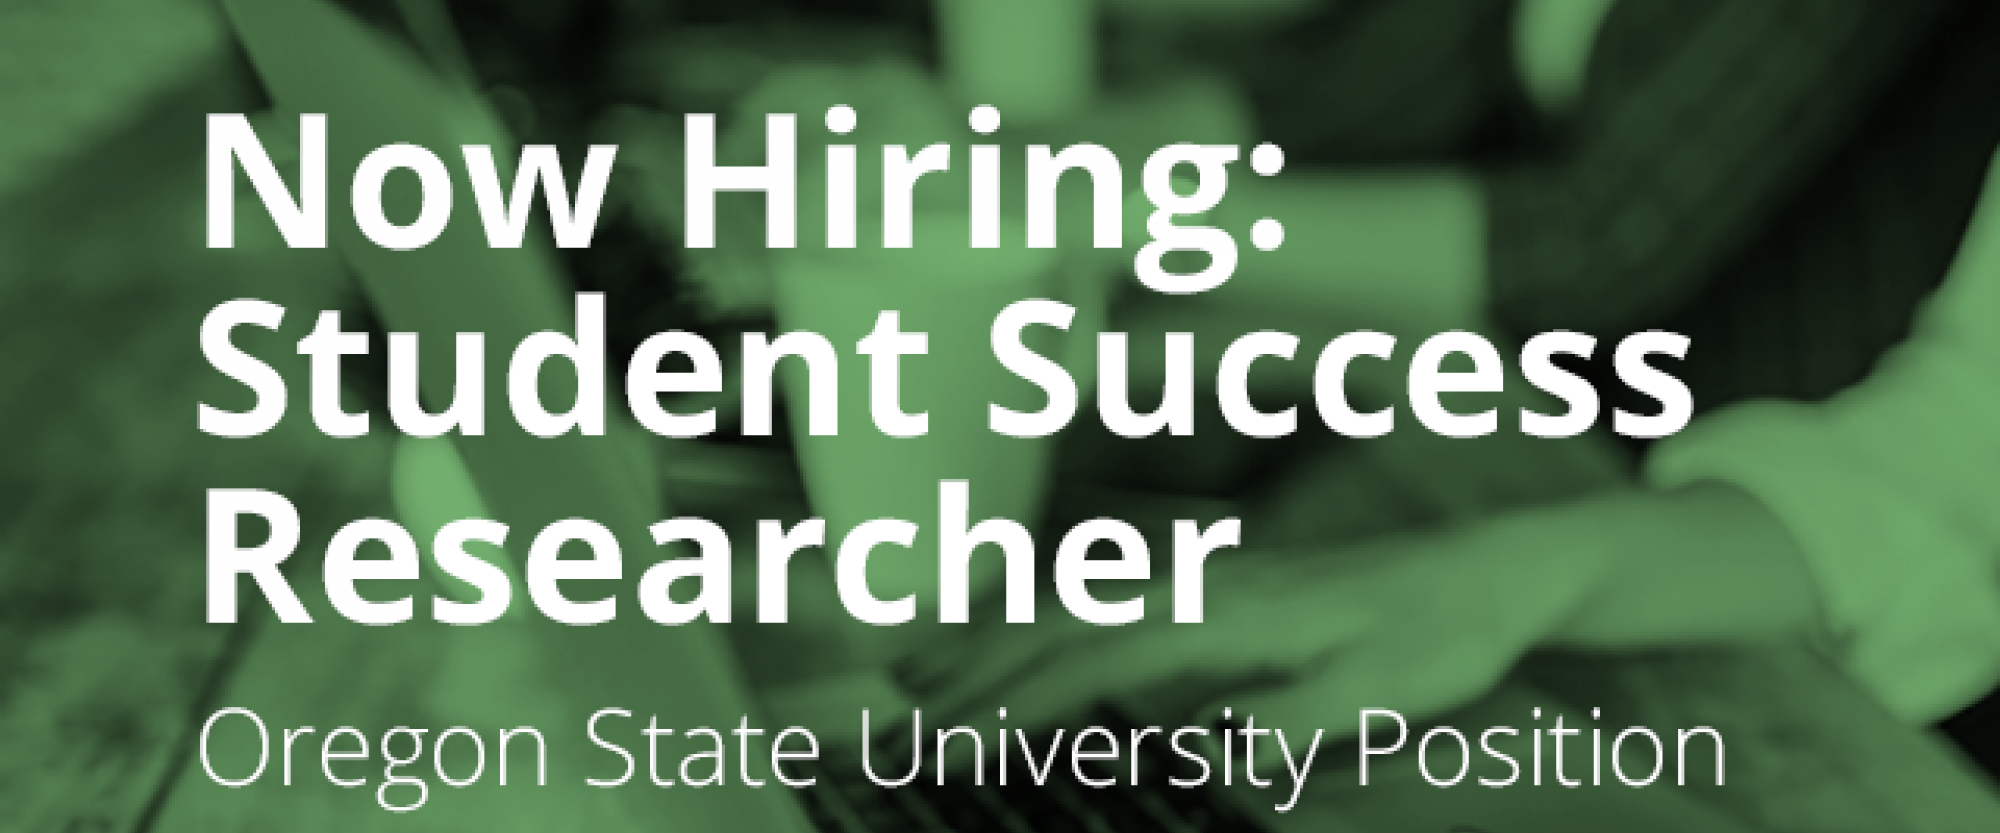 Now Hiring: Student Success Researcher